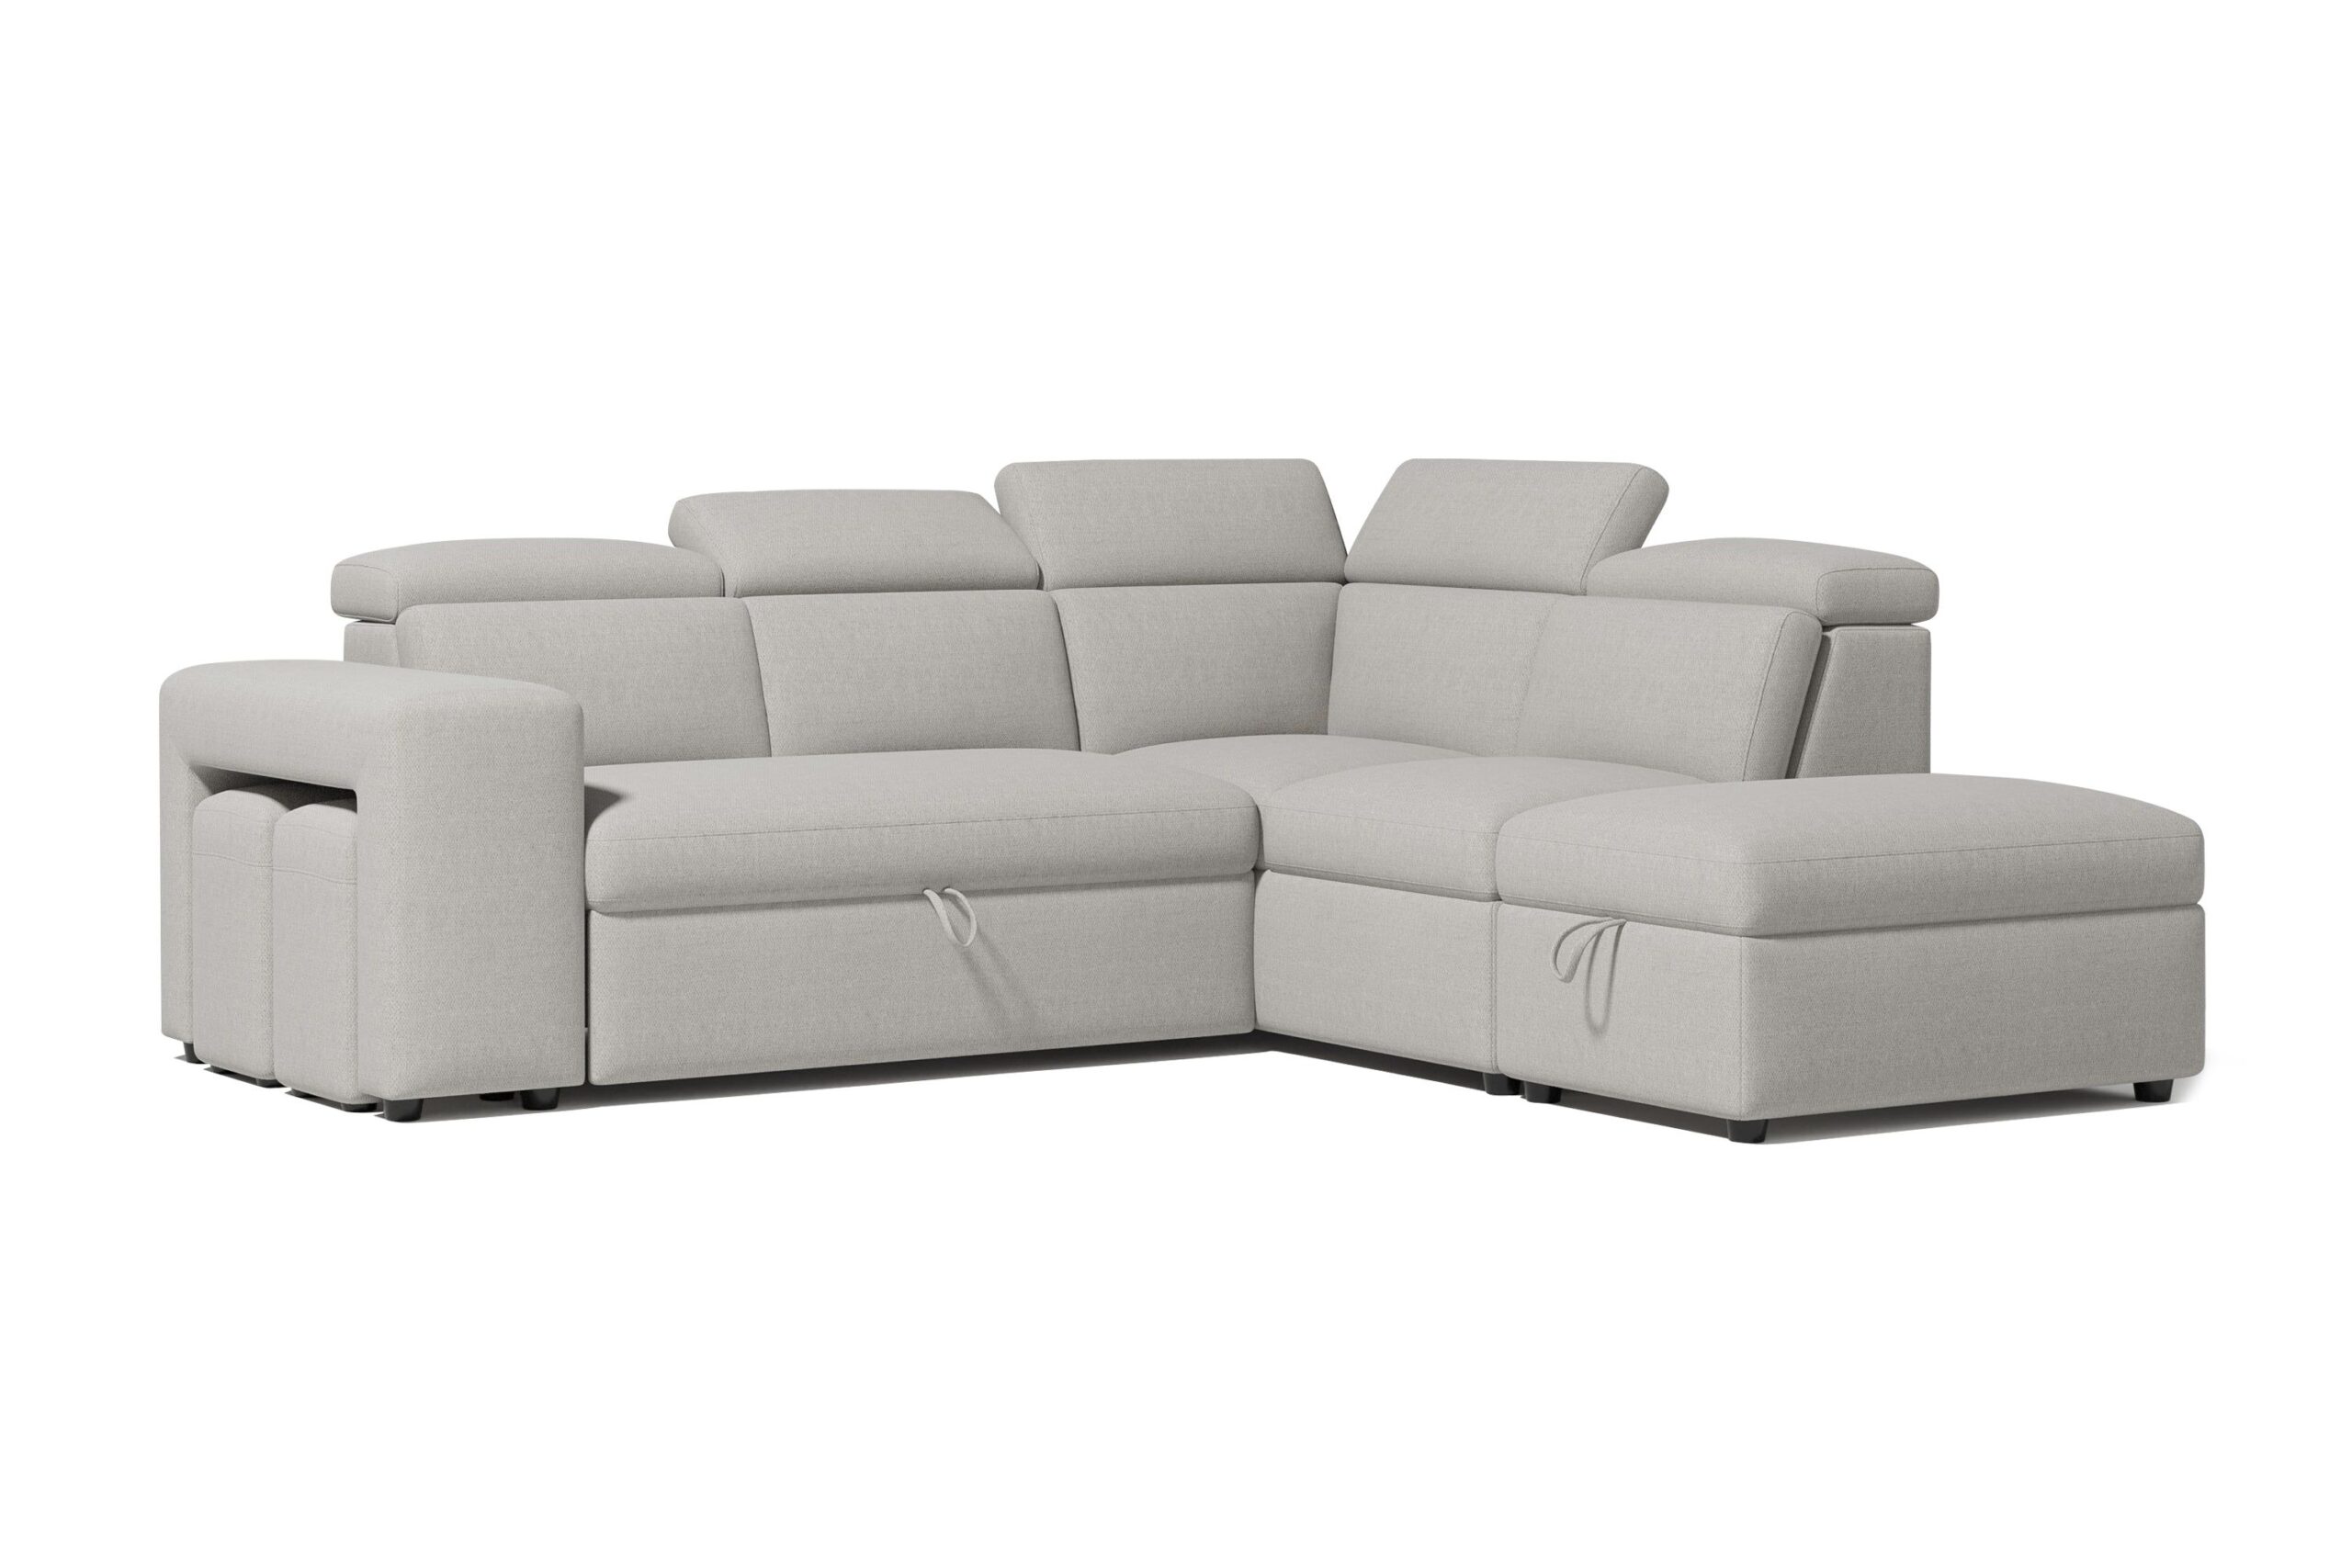 Discover the Ultimate Space-Saving Solution: Sofa Bed Sectional With Storage